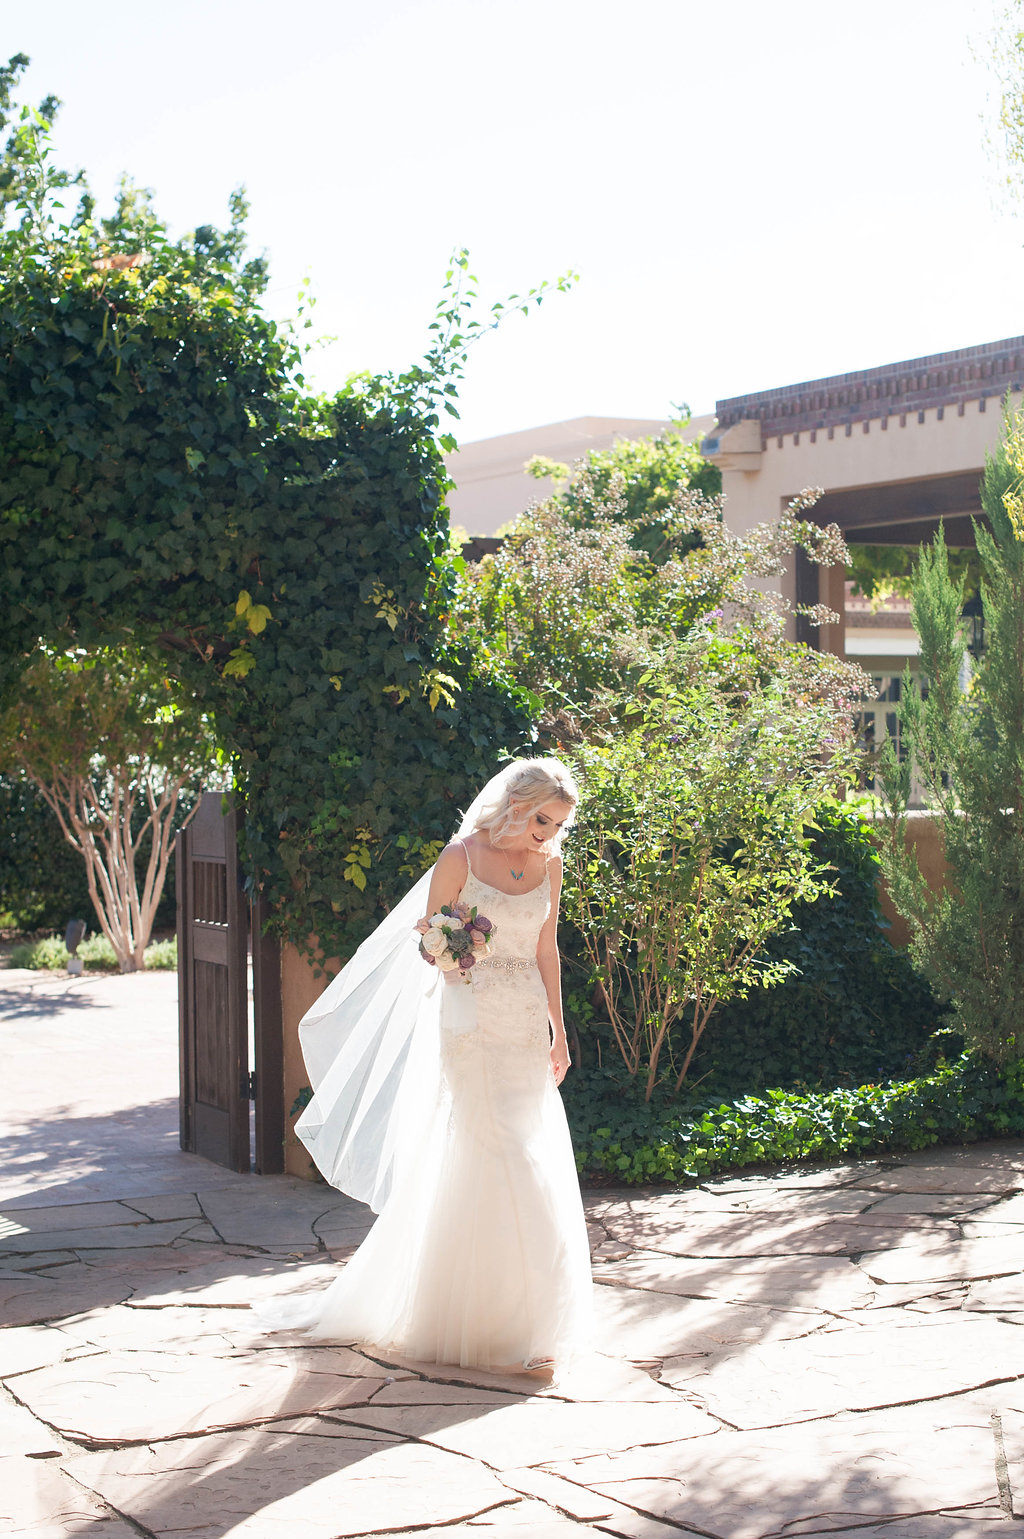 Perfect Wedding Guide New Mexico Albuquerque Santa Fe planning design inspo inspiration photography local marriage love engagement ceremony wedding gown outdoor natural light portrait bride couple veil sunshine